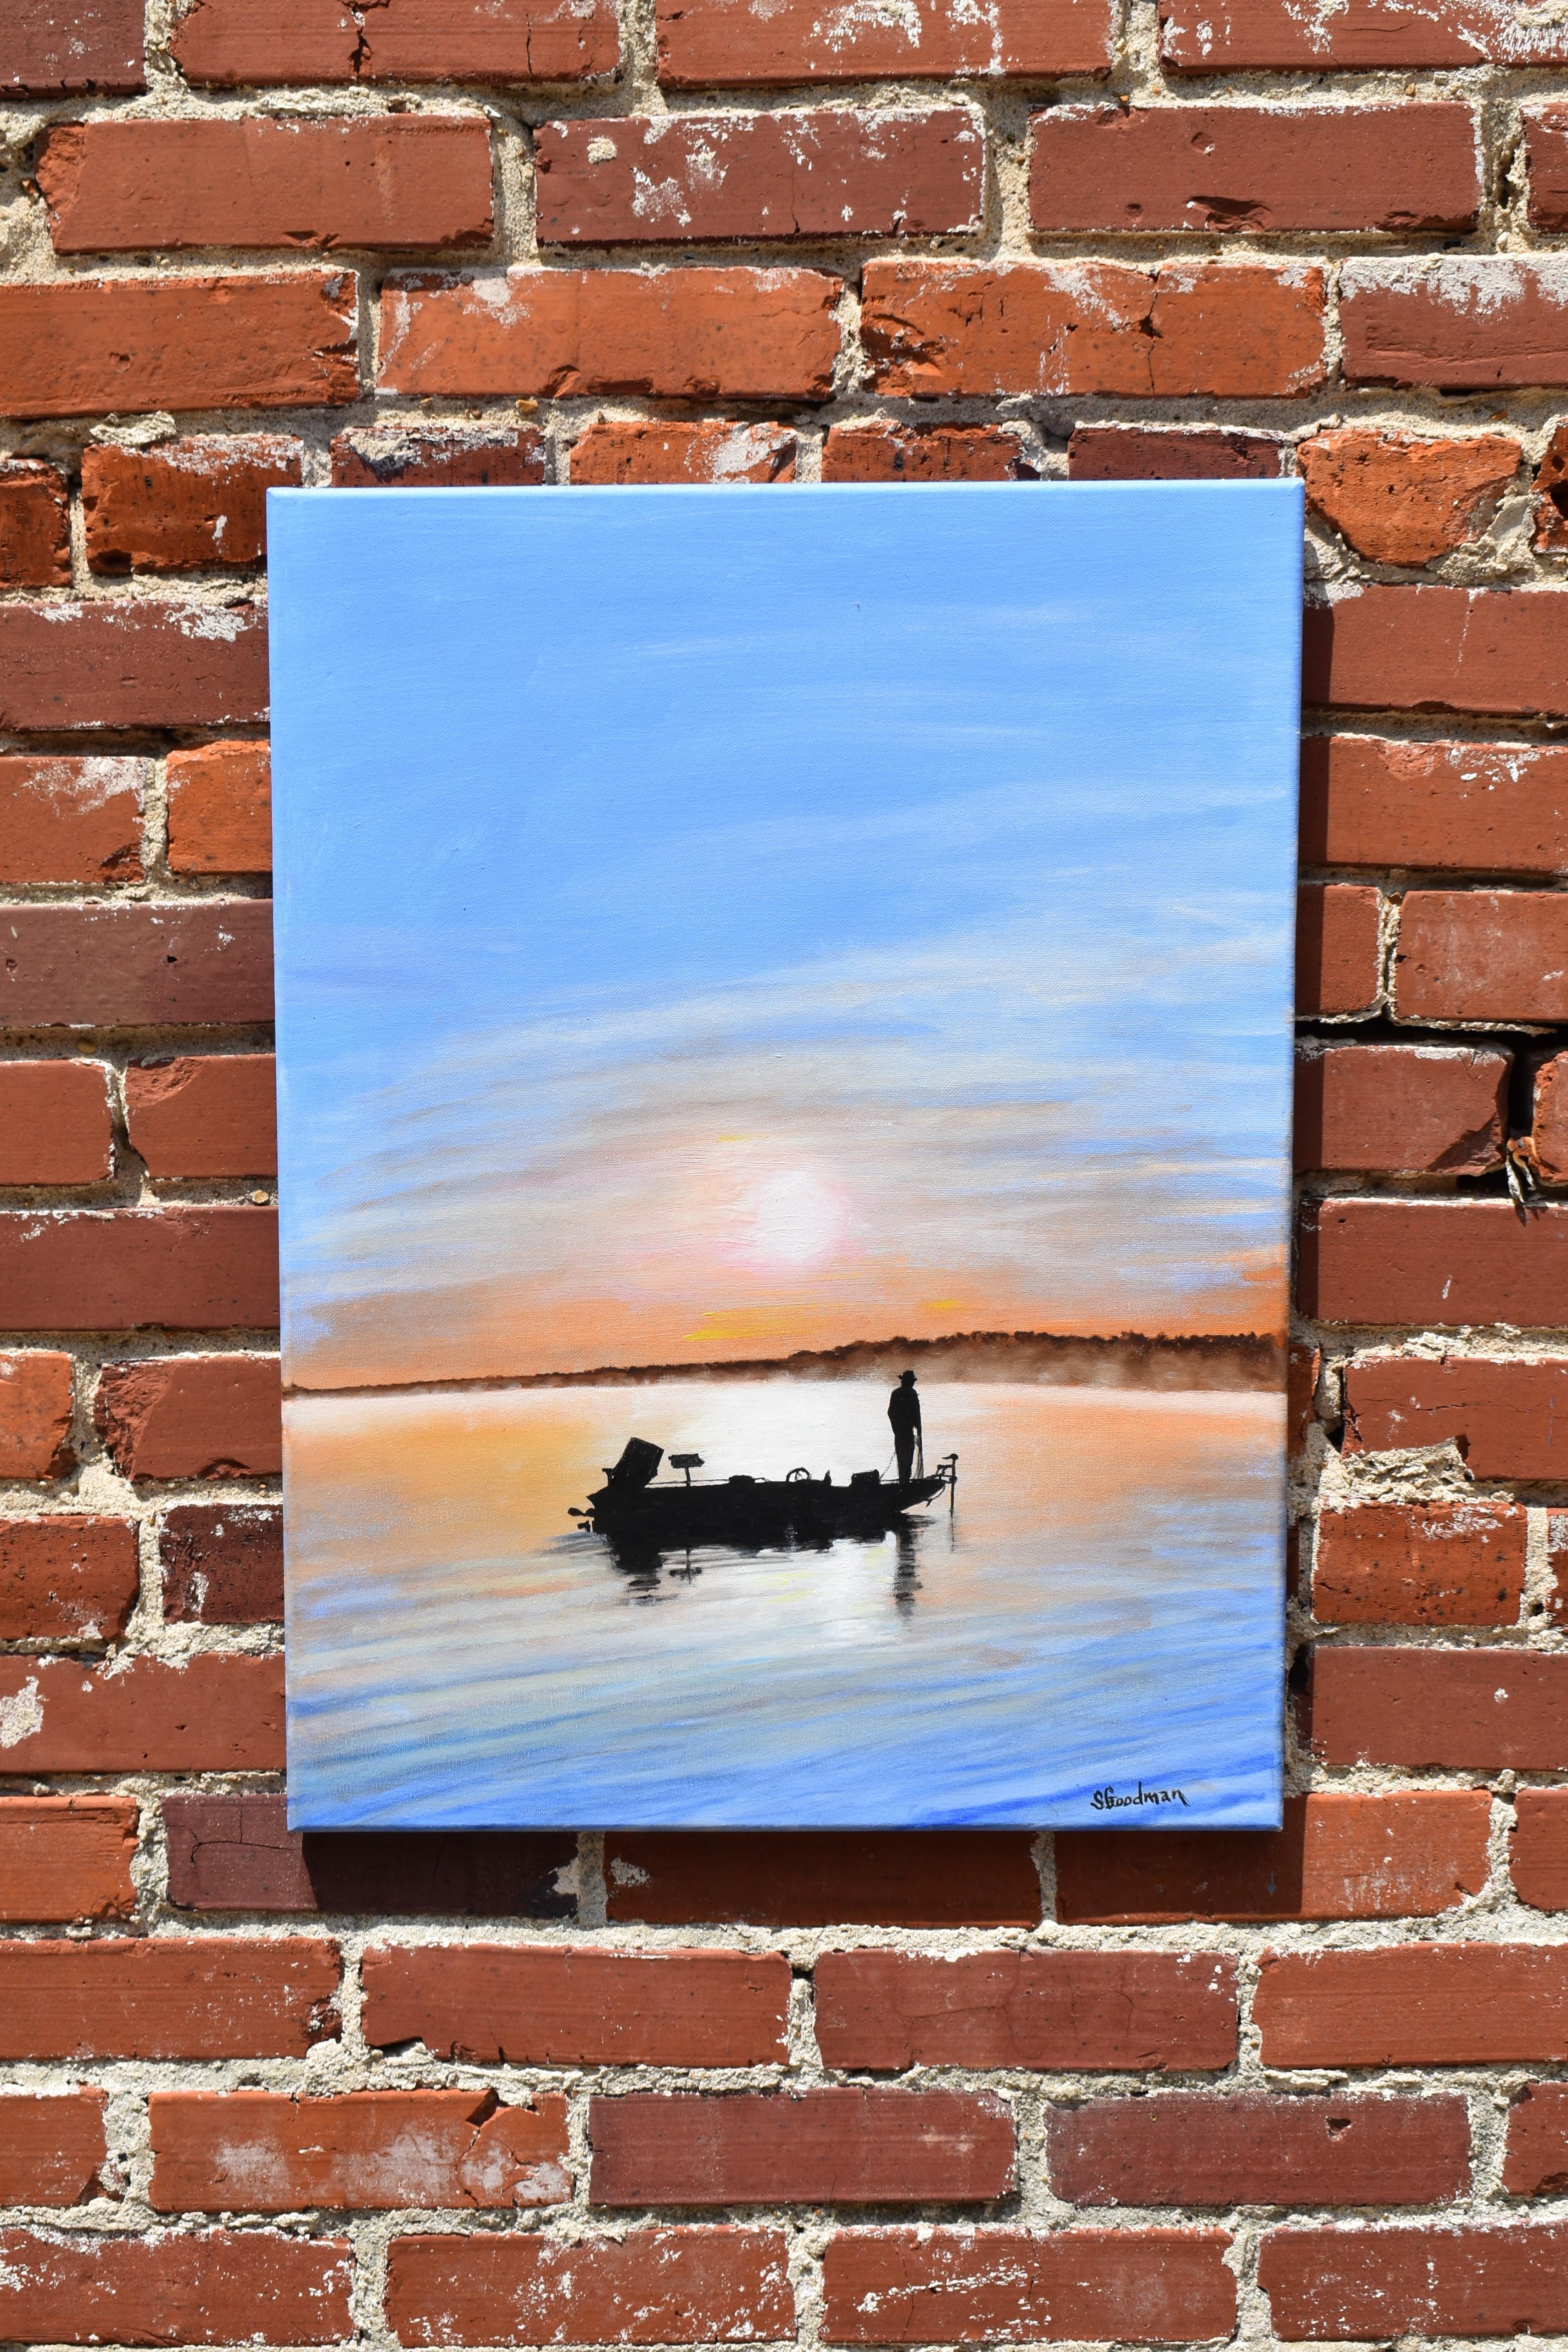 <p>Artist Comments<br>Artist Shela Goodman paints a silhouette of a man in his boat, floating peacefully on a bright still lake. With his motor engine up and rope in his hands, he appears to be preparing for an early morning of fishing. Shela takes